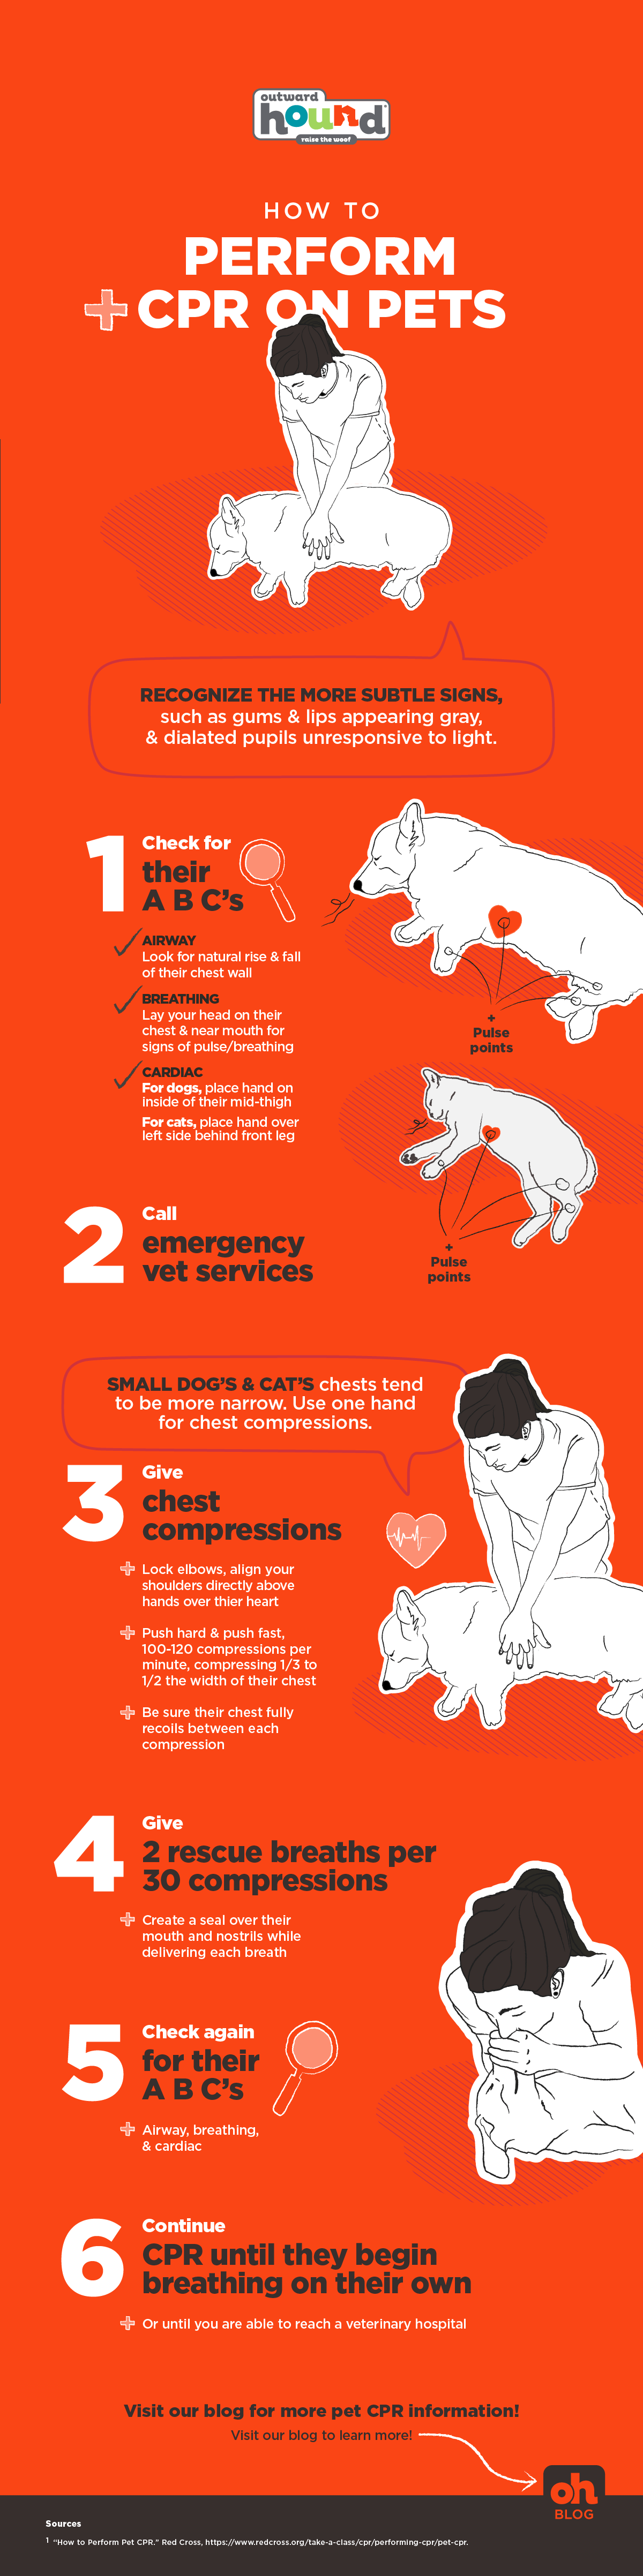 how to perform cpr on a dog infographic